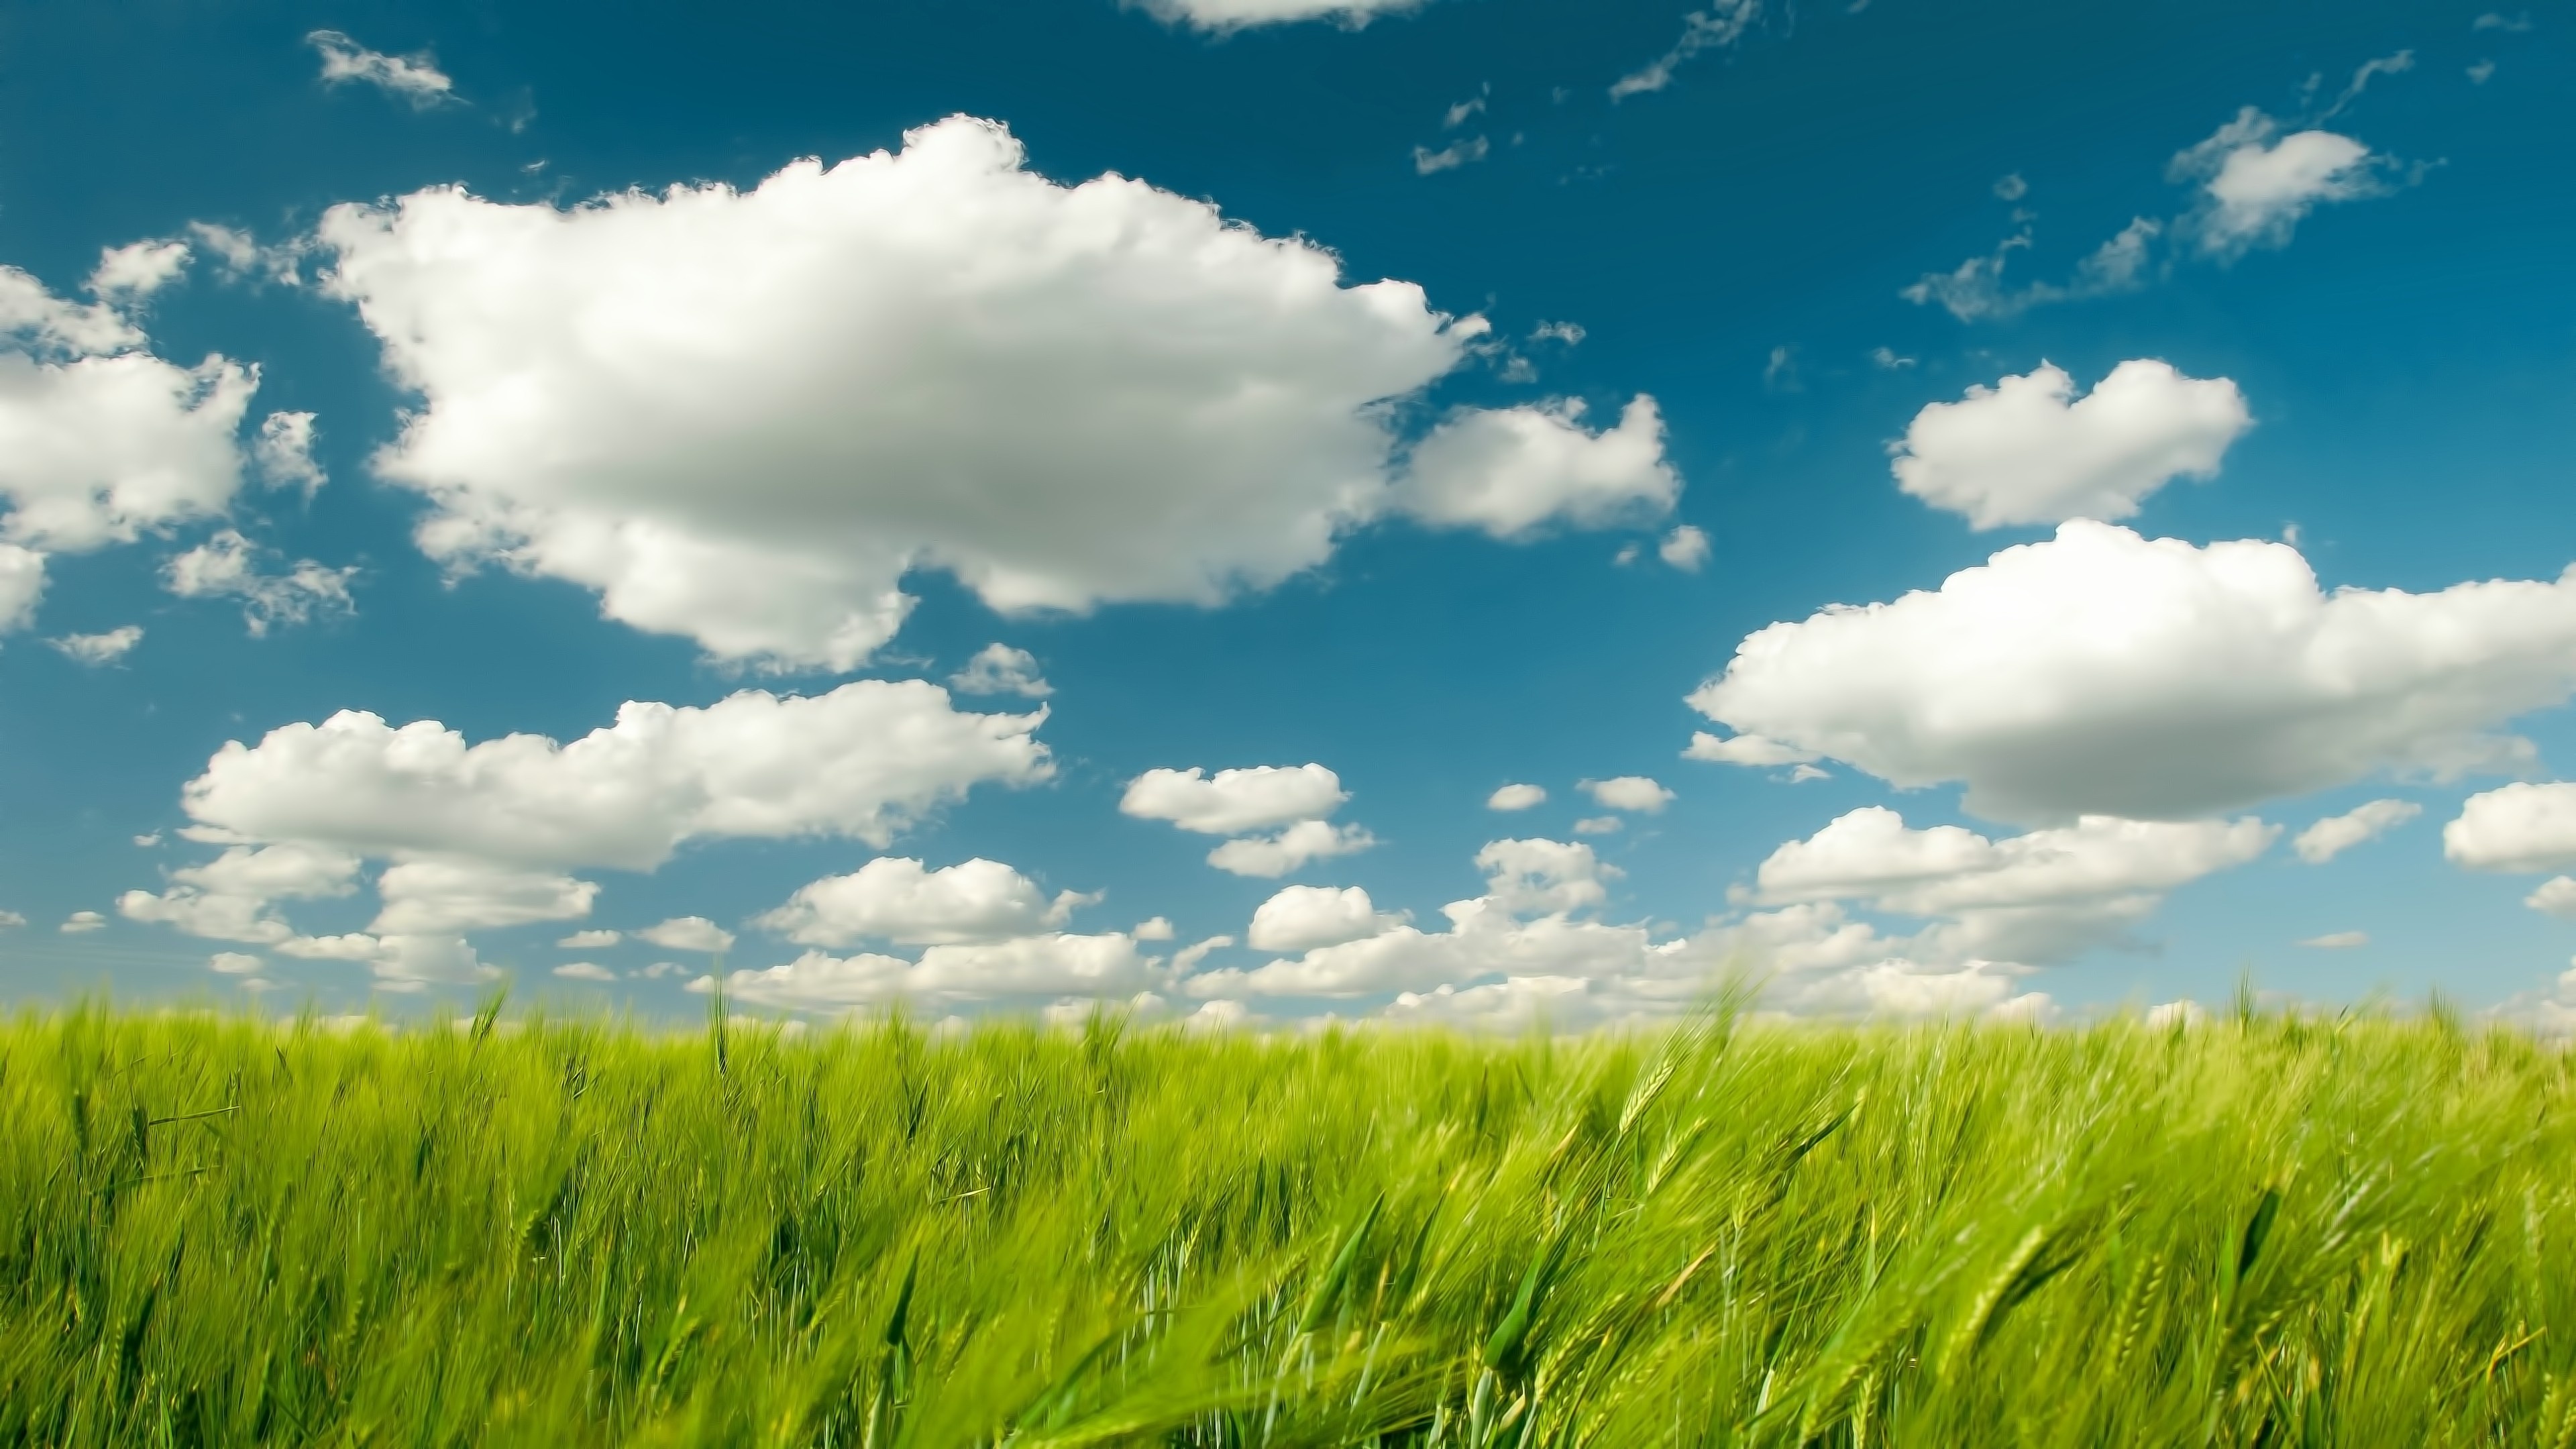 Grass and Sky: Sunlight, Landscape, Nature, Horizon, Steppe, Clouds, Grassland, Pasture, Agriculture, Meadow, Plain, Lawn, Prairie, Atmosphere of Earth, Ecosystem. 3840x2160 4K Background.